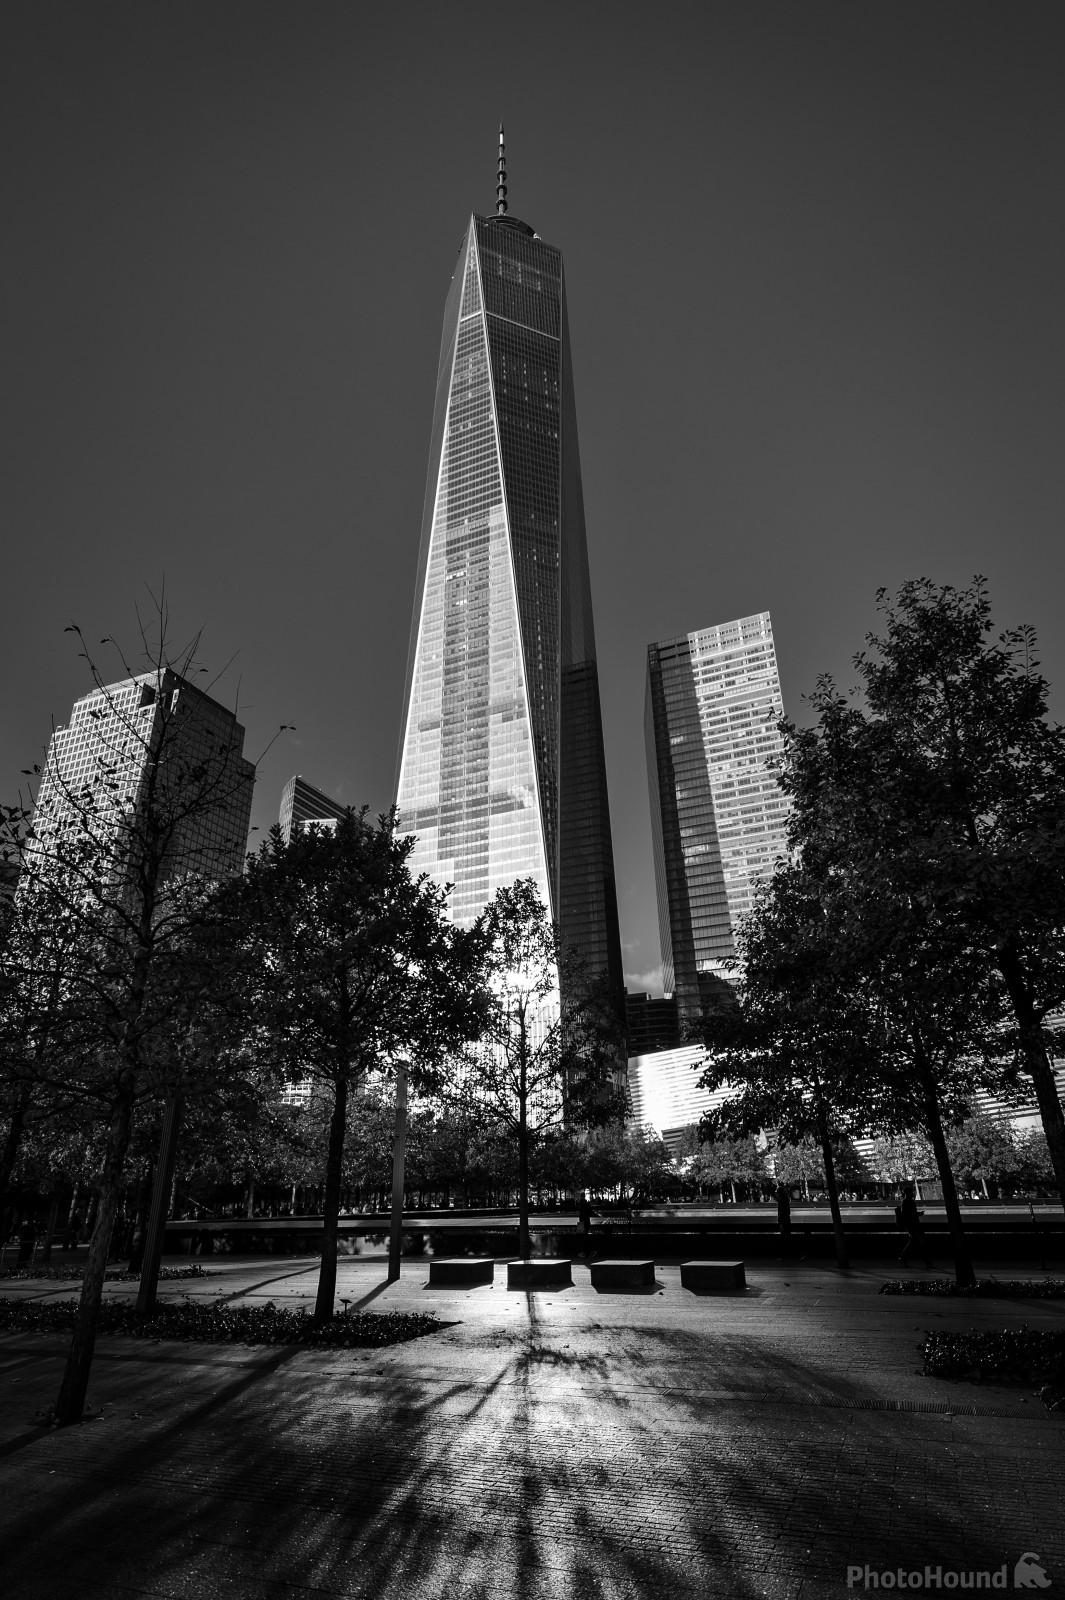 Image of One World Trade Center from Ground Zero by VOJTa Herout